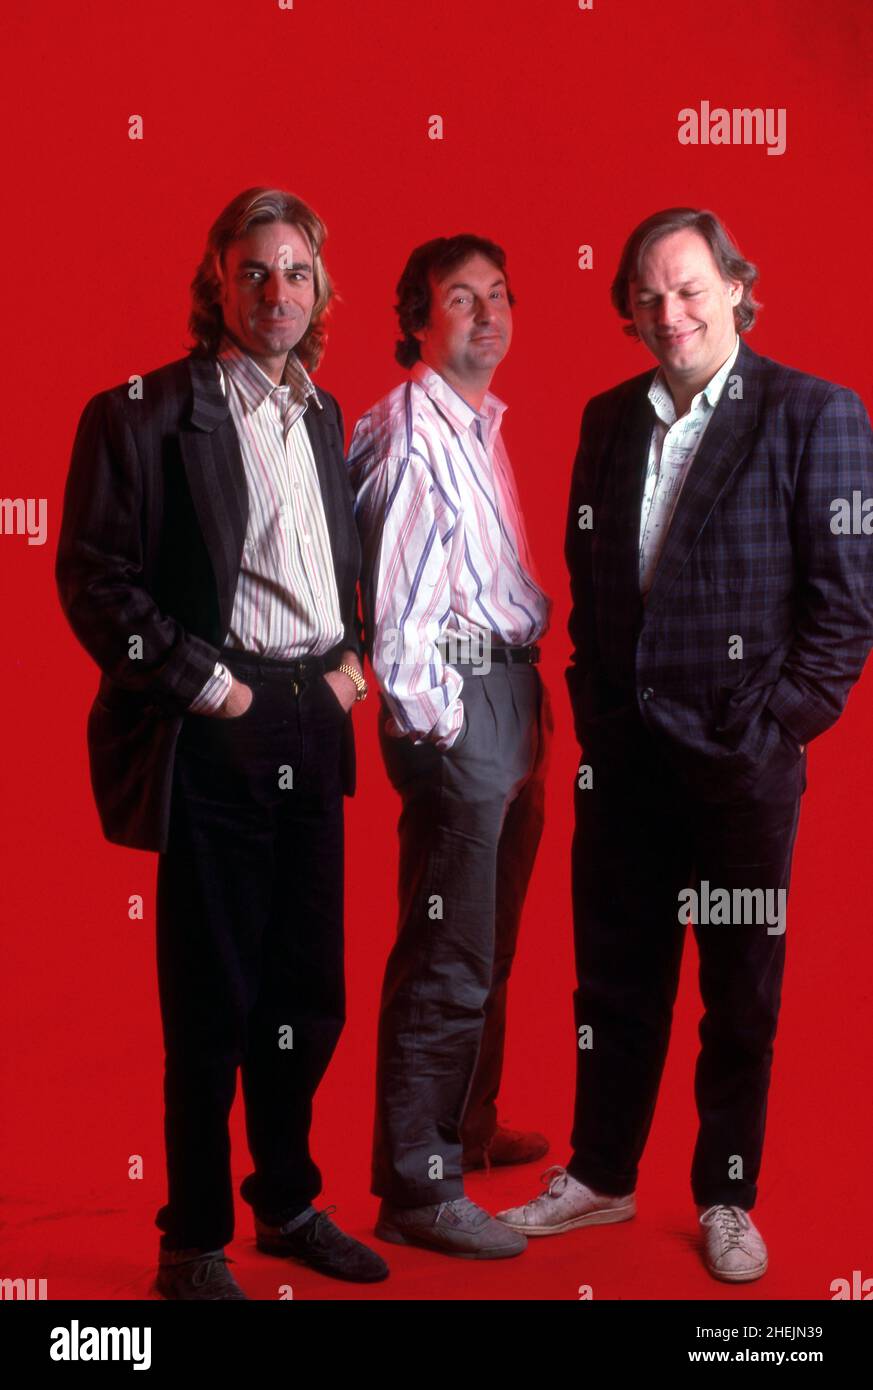 DETROIT - SEPTEMBER 28: (L-R) Keyboardist Richar Wright (1943-2008), drummer and founding member Nick Mason, and guitarist, singer and songwriter Davcid Gilmour, all members of Pink Floyd, pose backstage at the Rosemont Horizon during the band's 'Momentary Lapse of Reason Tour' on September 28, 1987, in Rosemont, IL.  Credit: Ross Marino/Rock Negatives /MediaPunch Stock Photo